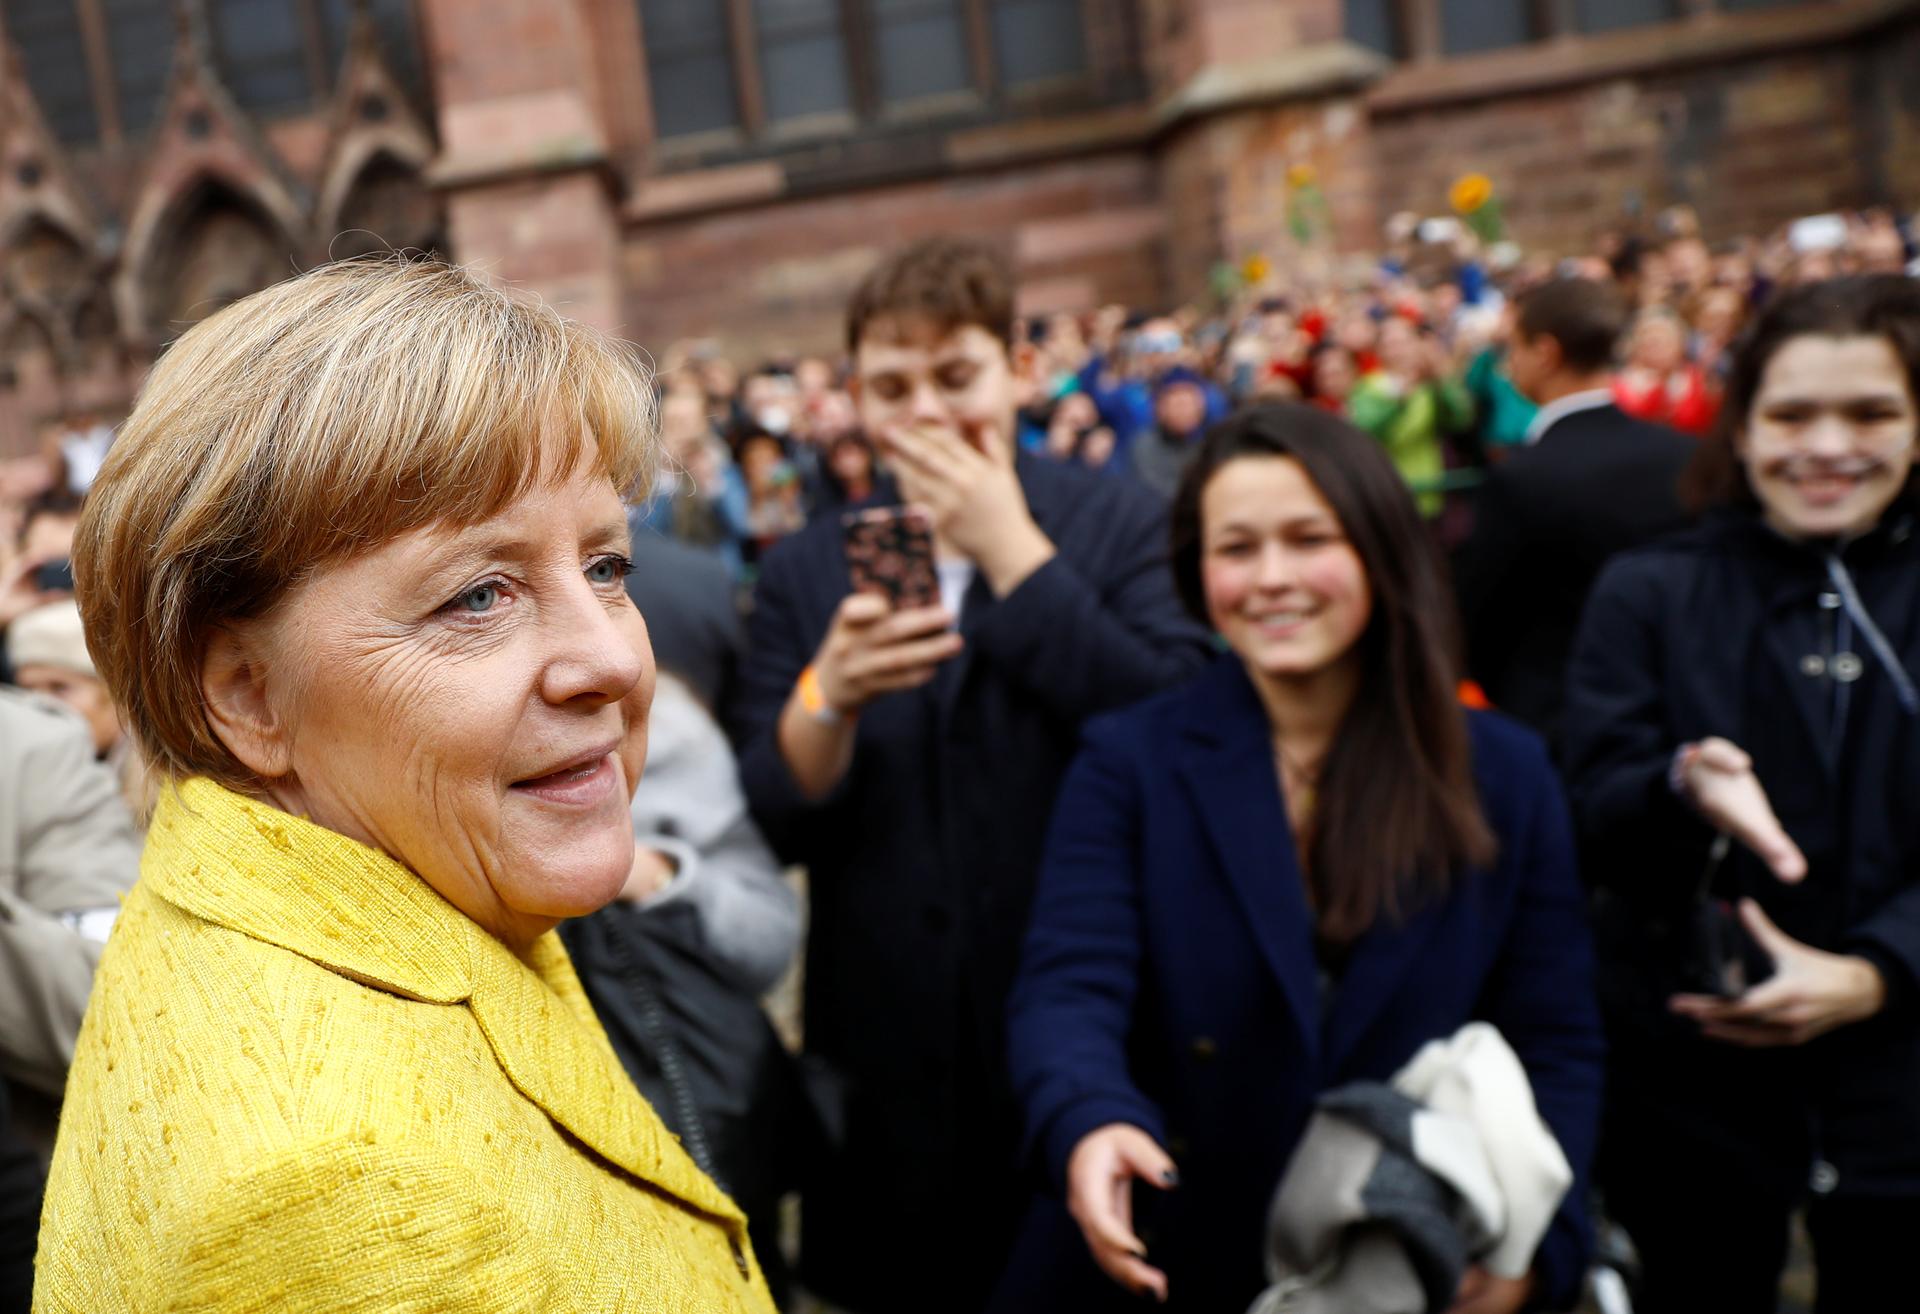 German Chancellor Angela Merkel, the top candidate of the Christian Democratic Union Party (CDU) for the upcoming general elections, greets supporters during a campaign rally.